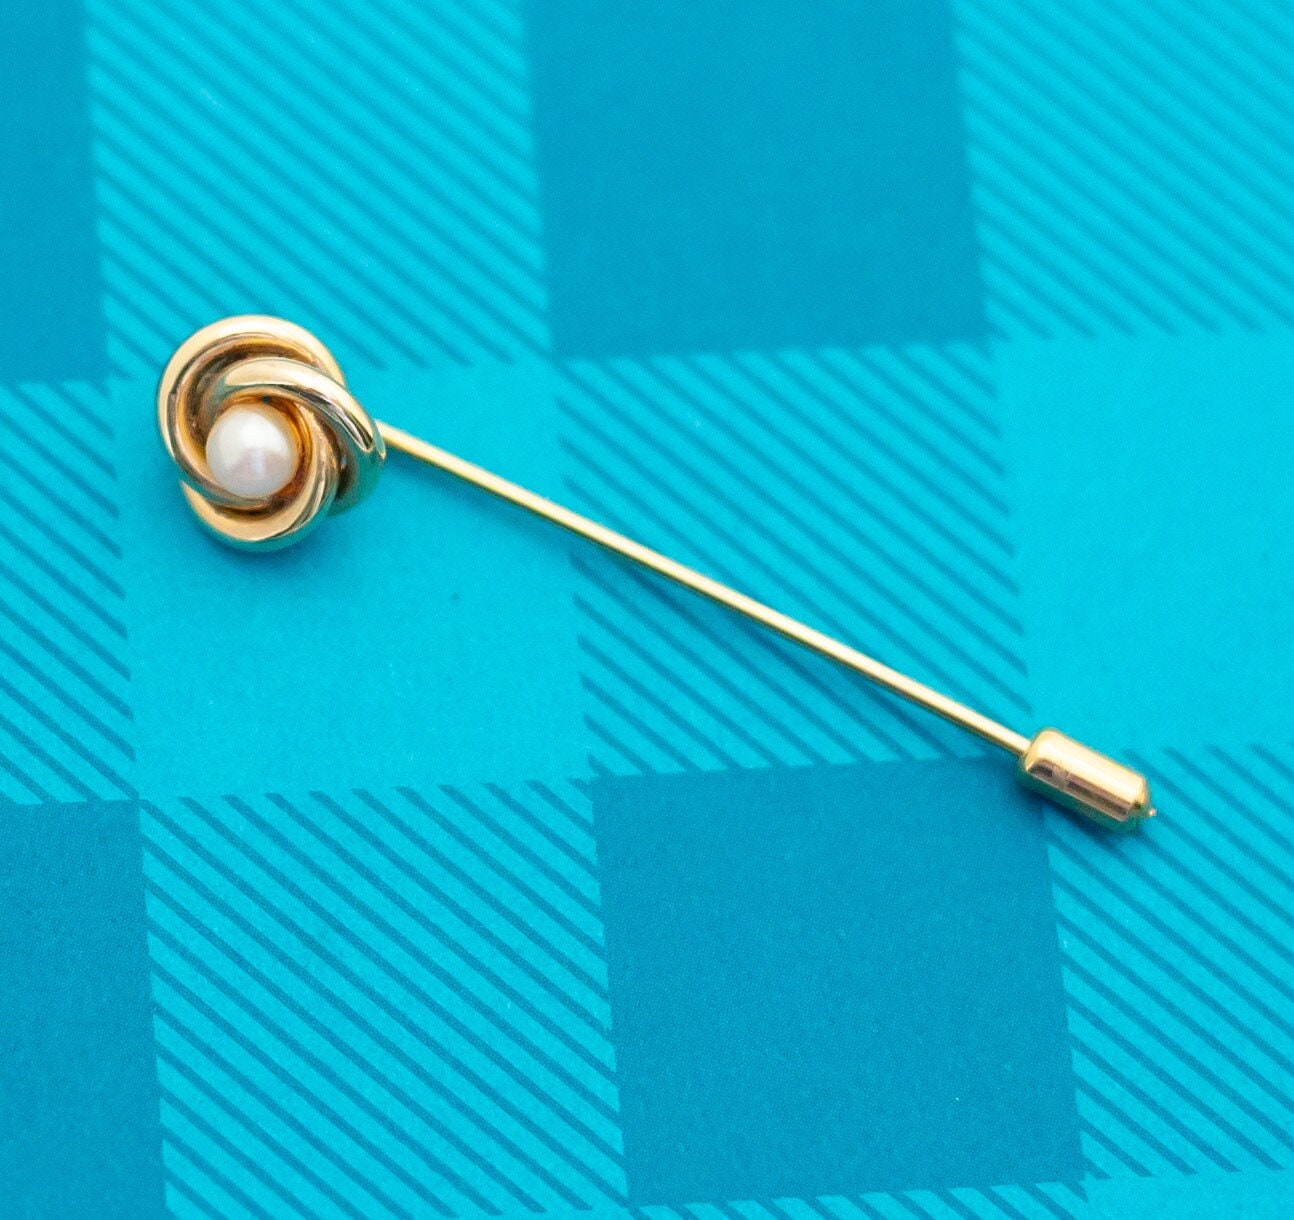 Silver Spiral Earring Hooks With Cup and Peg for Half Drilled